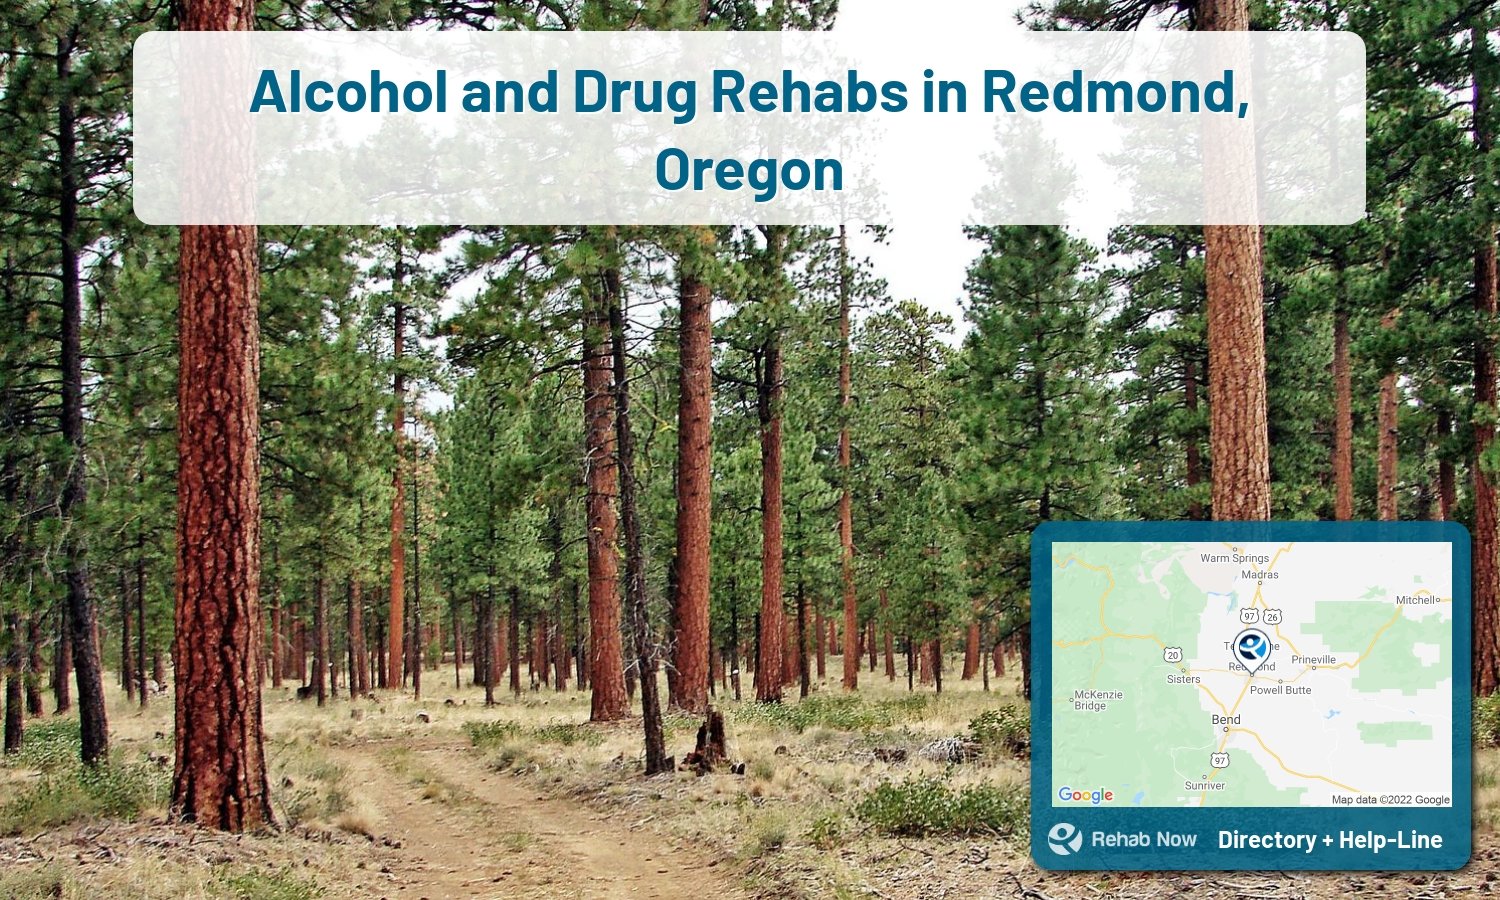 Ready to pick a rehab center in Redmond? Get off alcohol, opiates, and other drugs, by selecting top drug rehab centers in Oregon